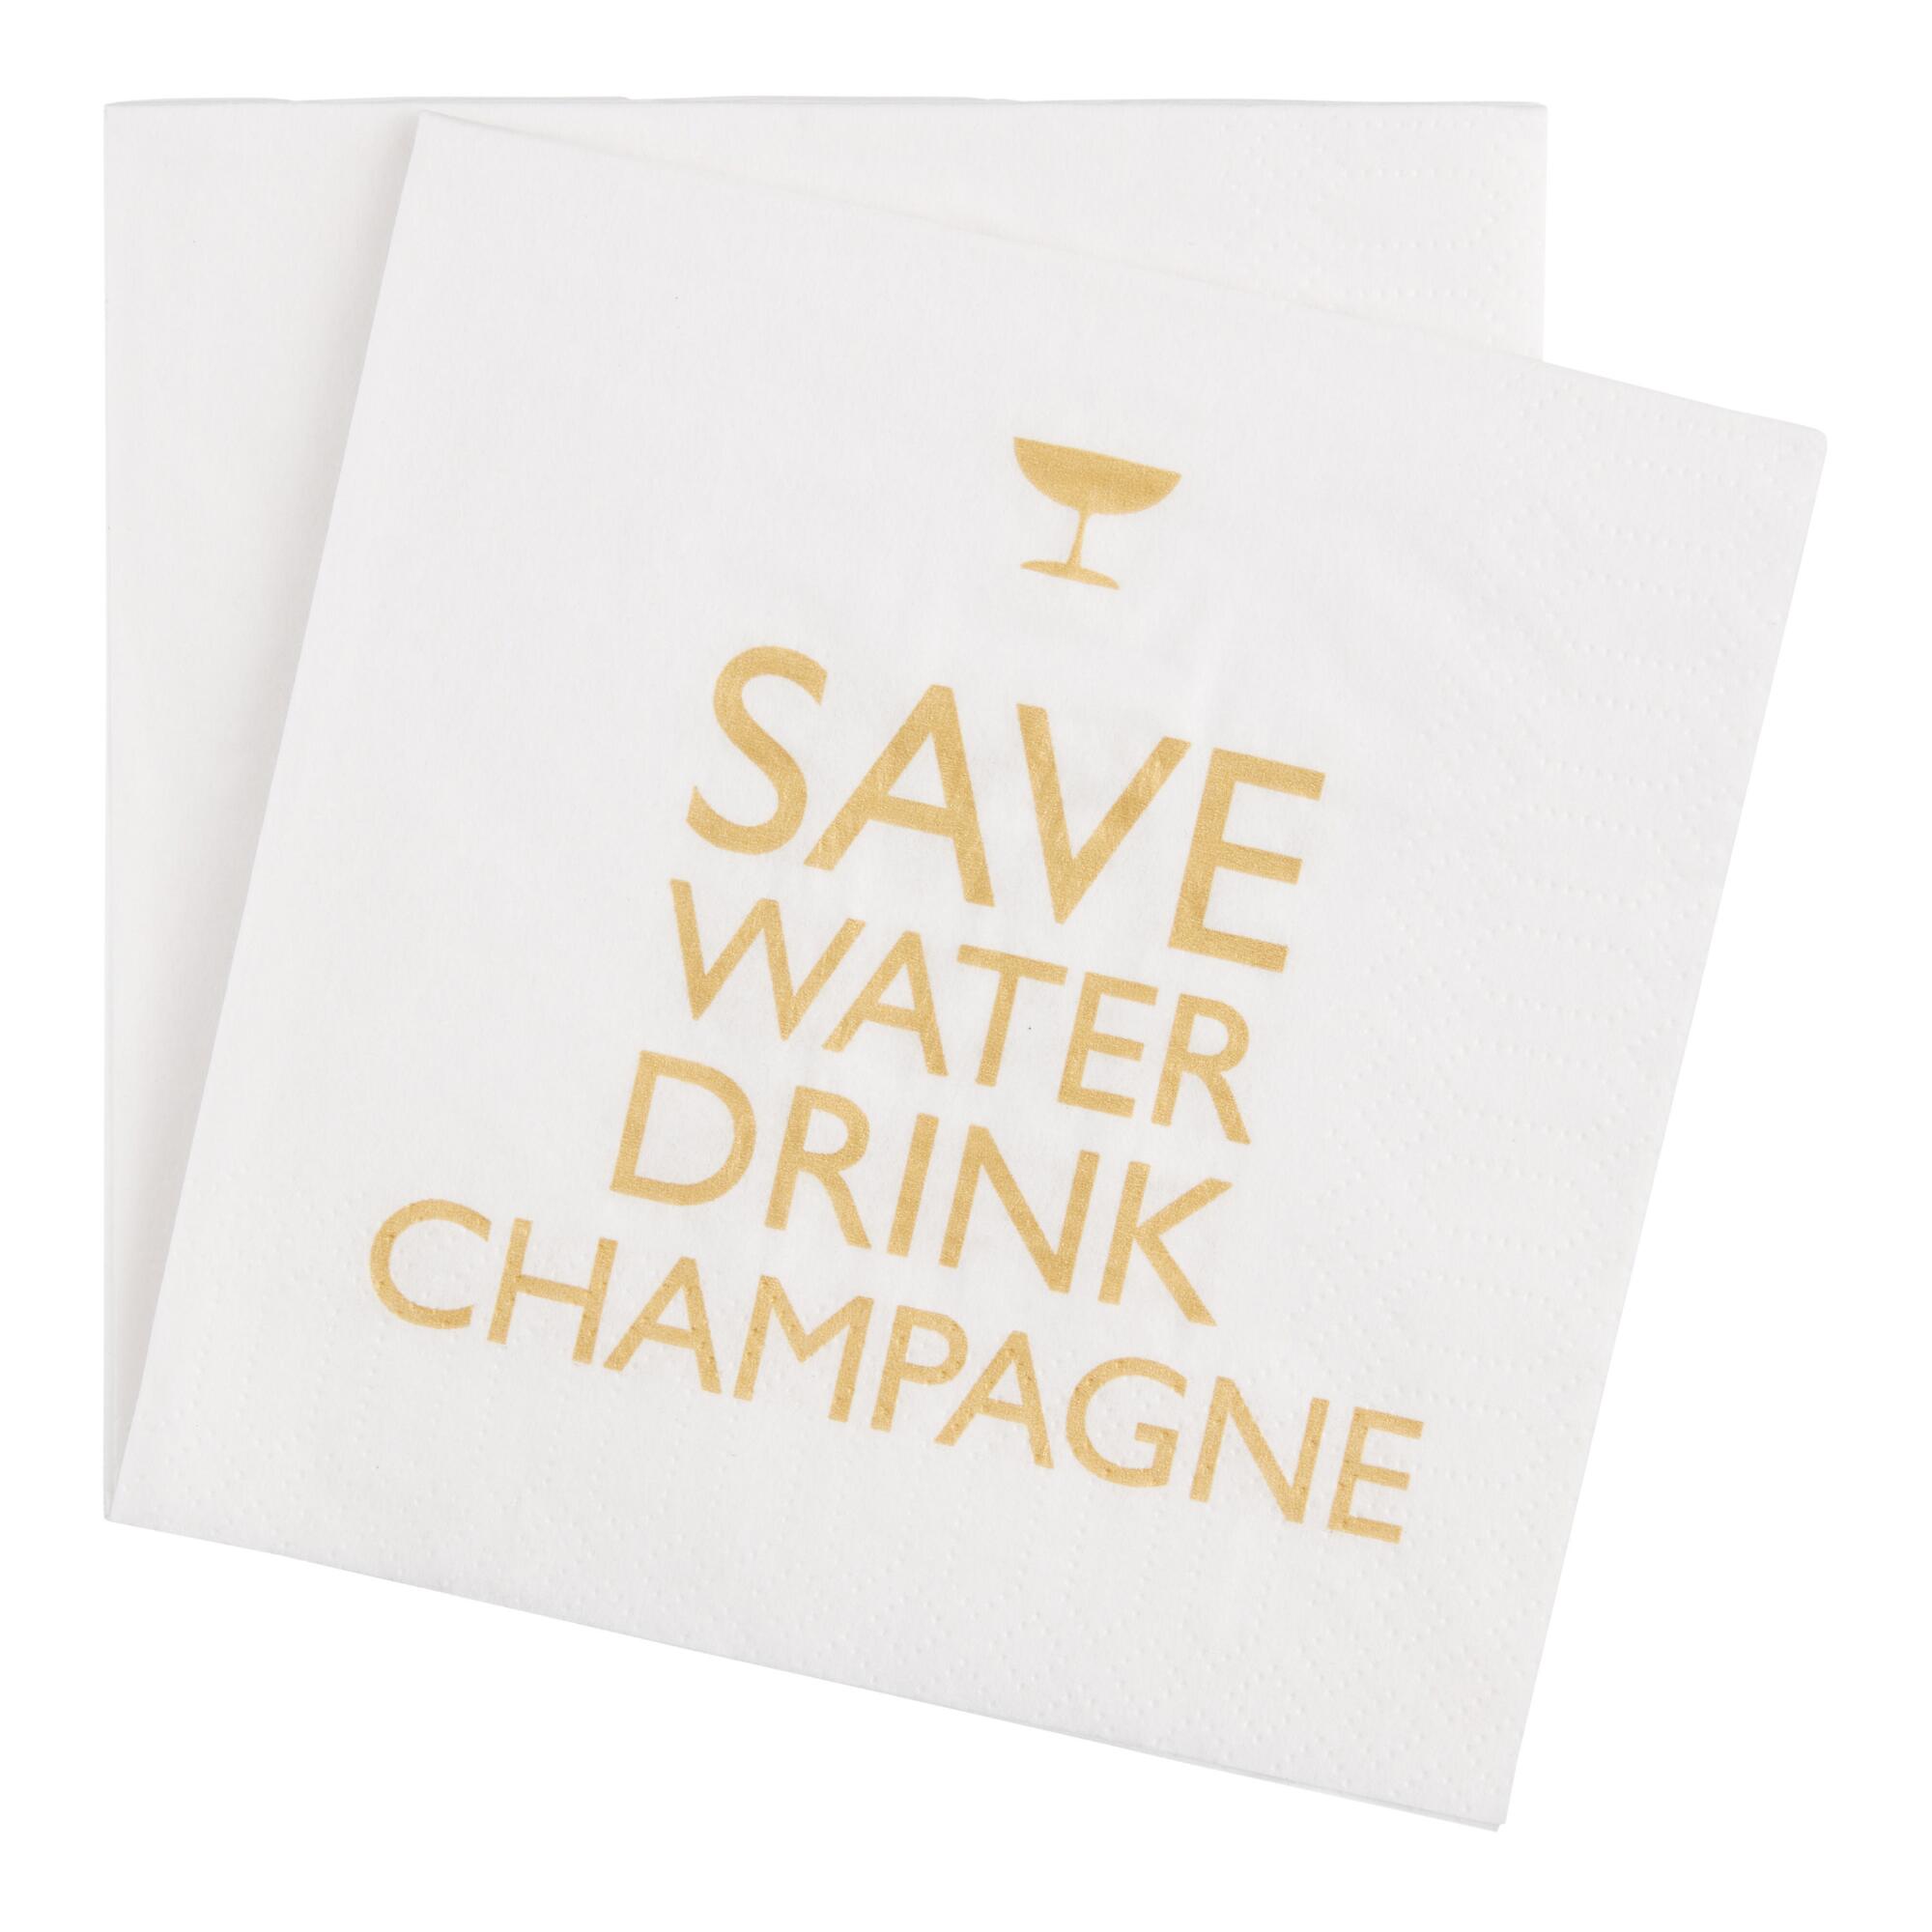 Save Water Drink Champagne Beverage Napkins 20 Count by World Market